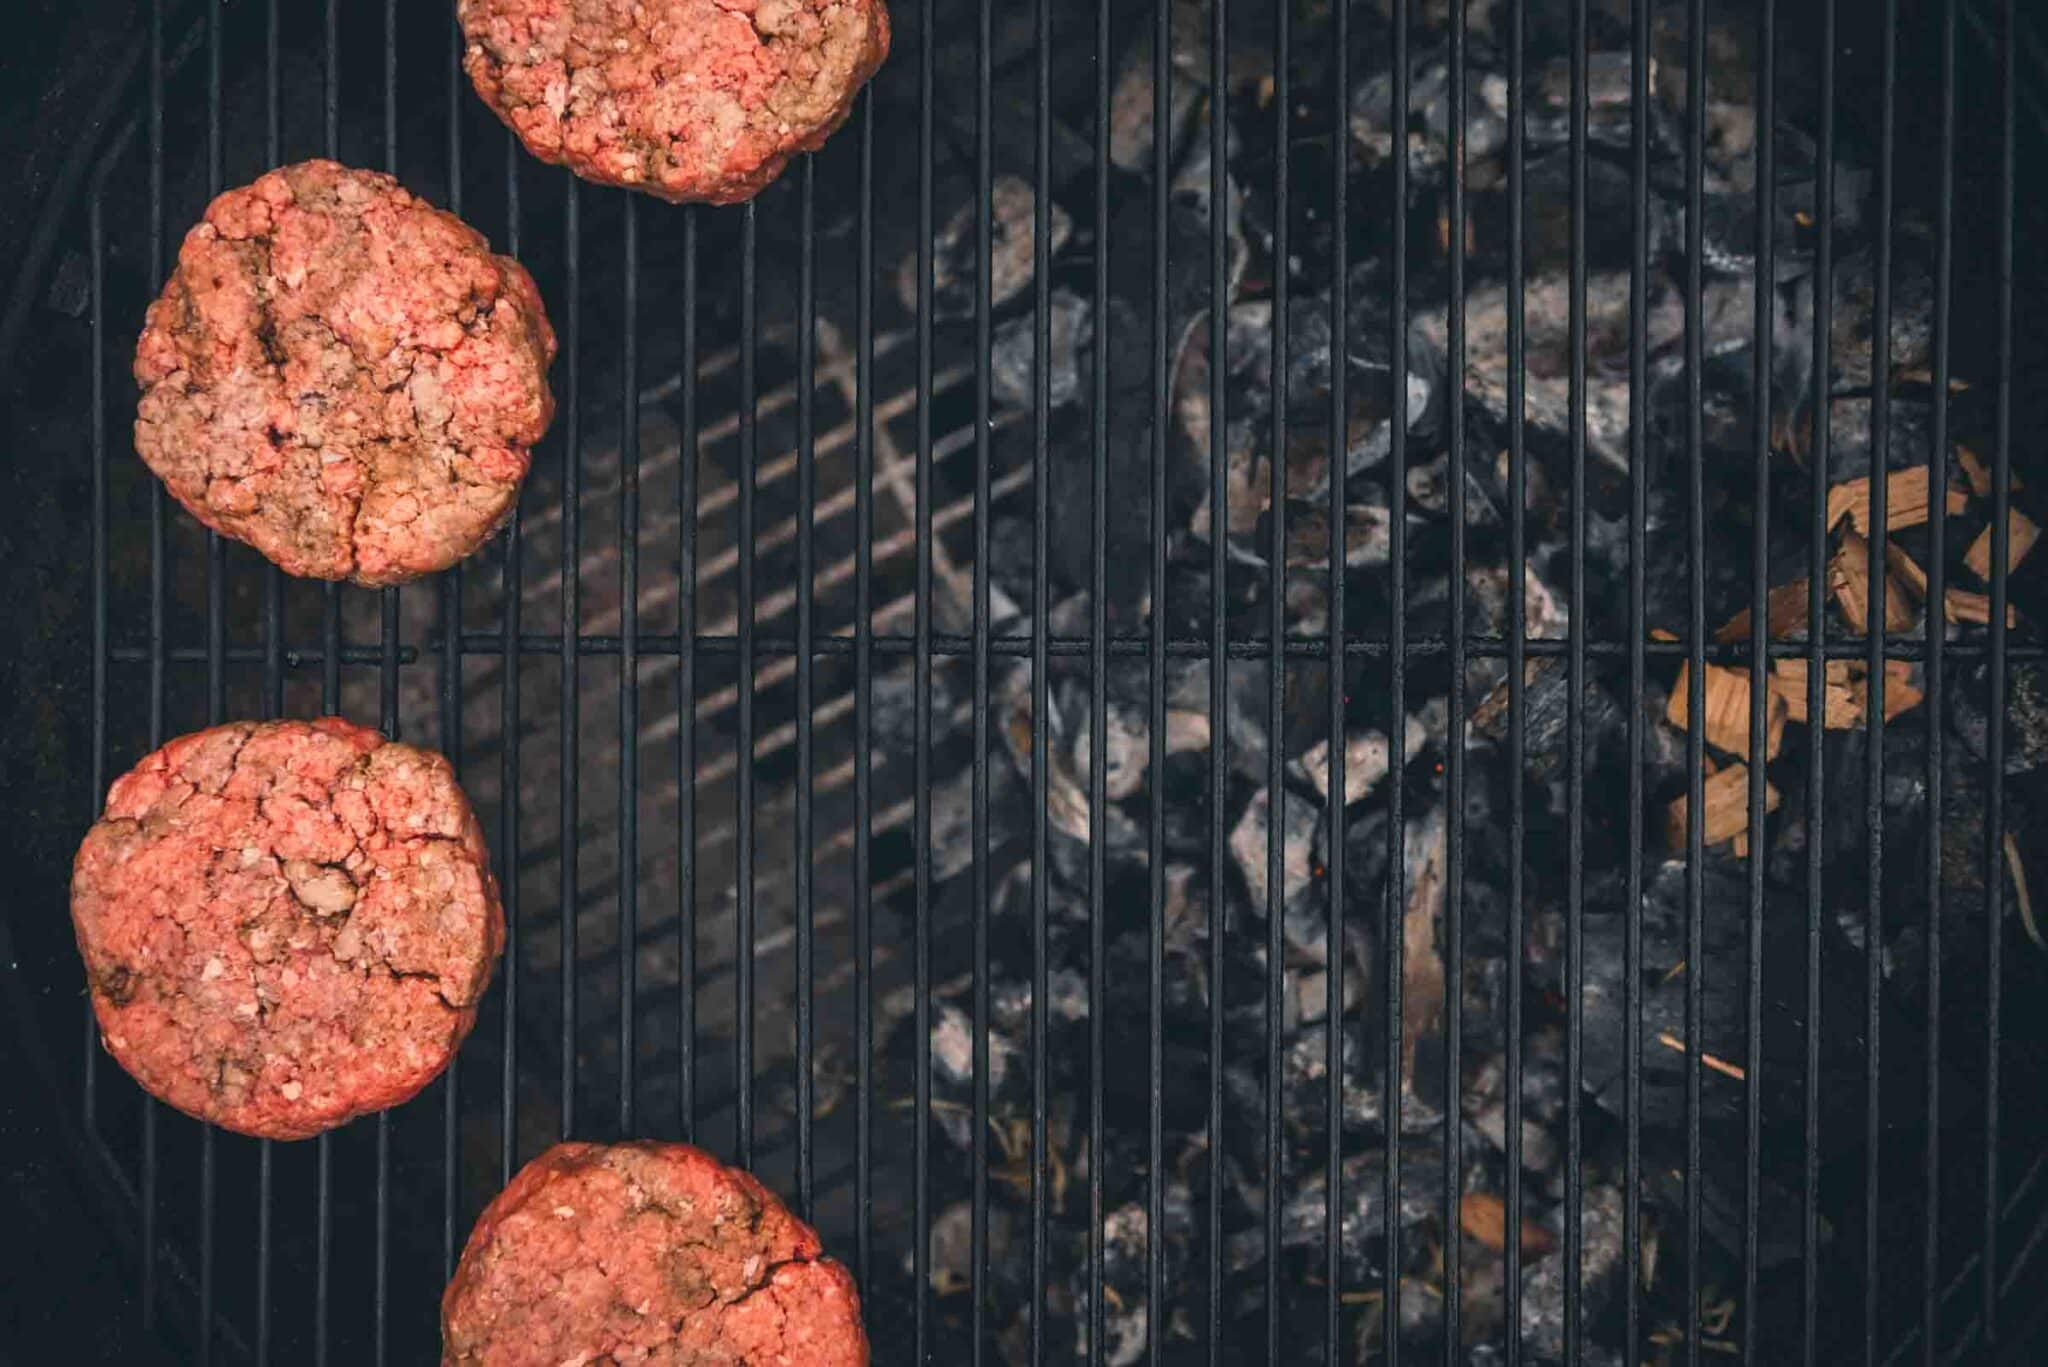 Showing burgers over indirect heat, with the coals on one side of the grill and the patties on the other. 